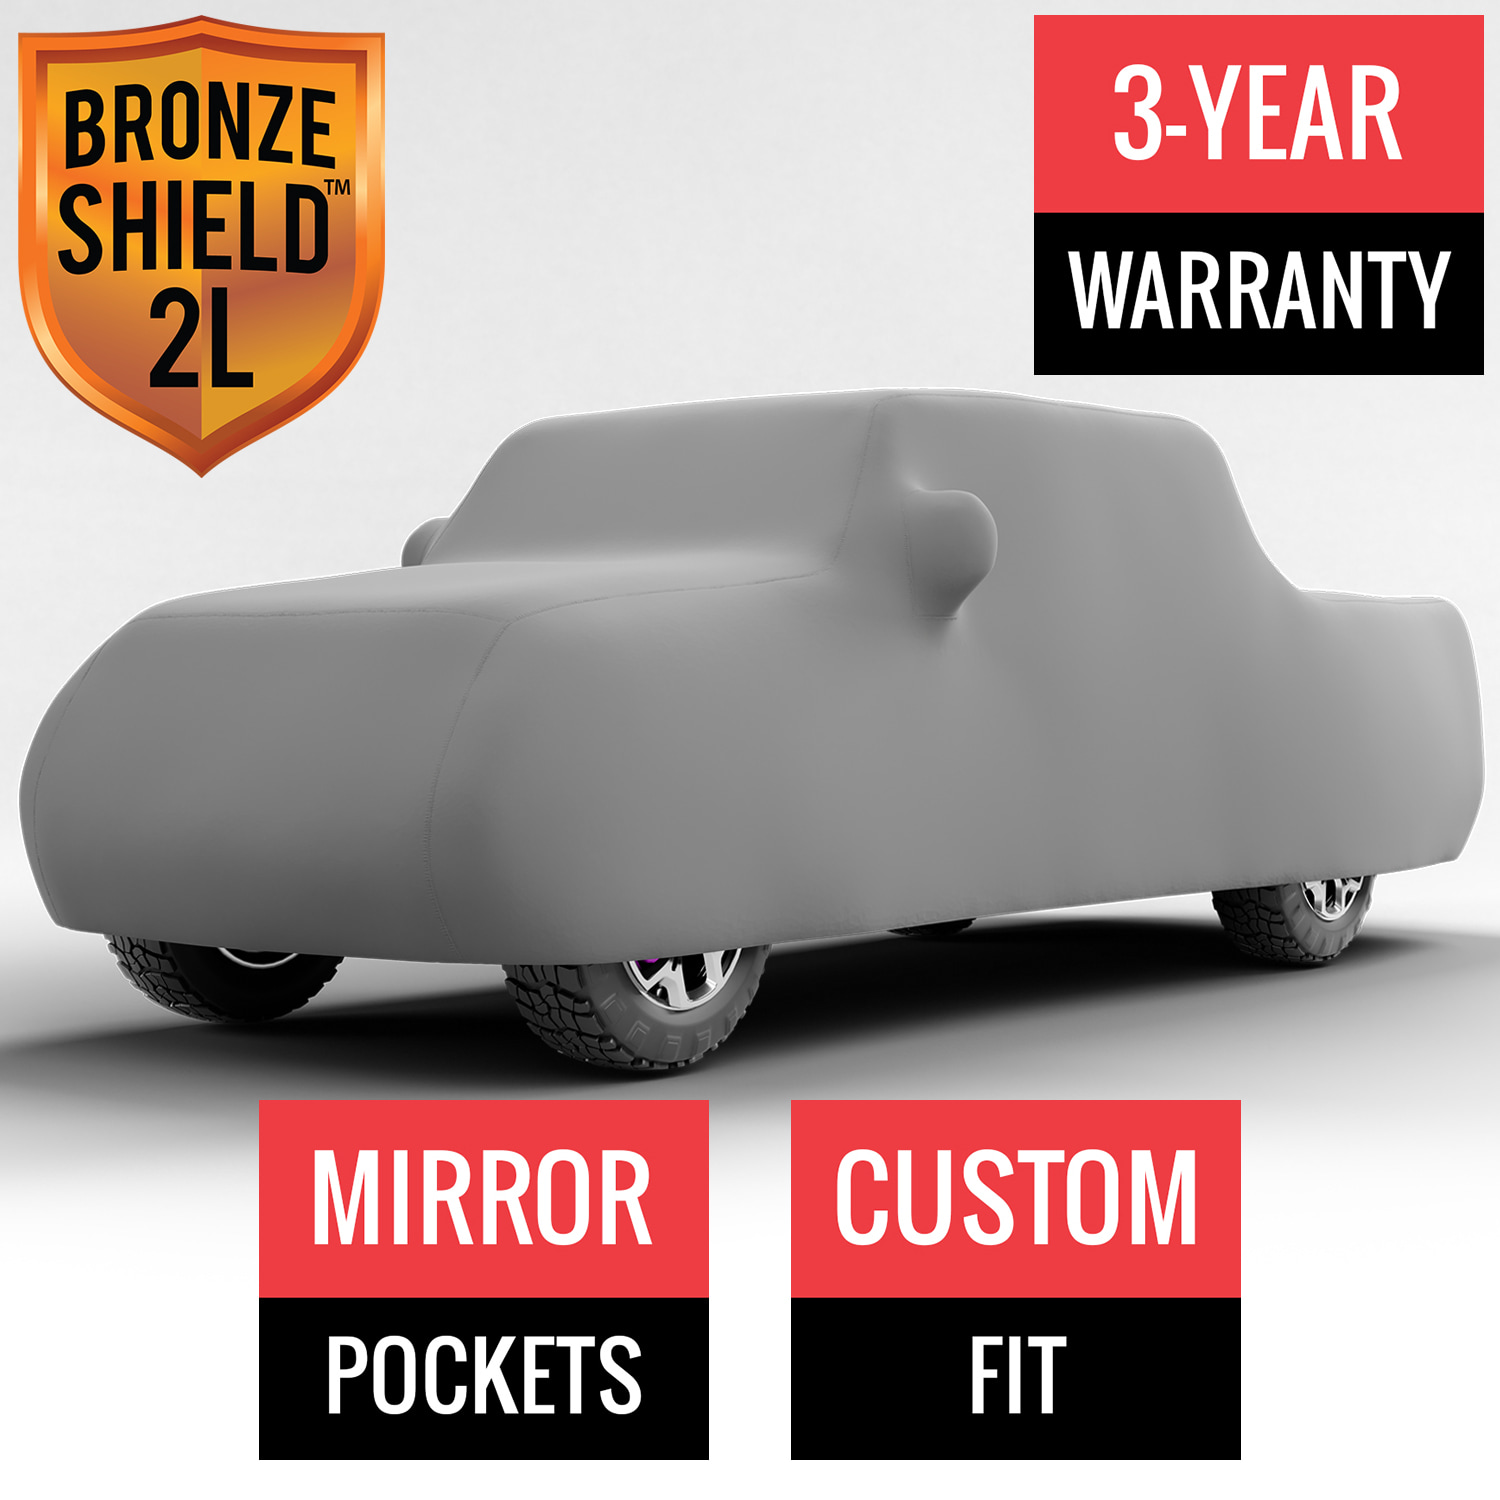 Bronze Shield 2L - Car Cover for Jeep Gladiator 2020 Crew Cab Pickup 5.0 Feet Bed